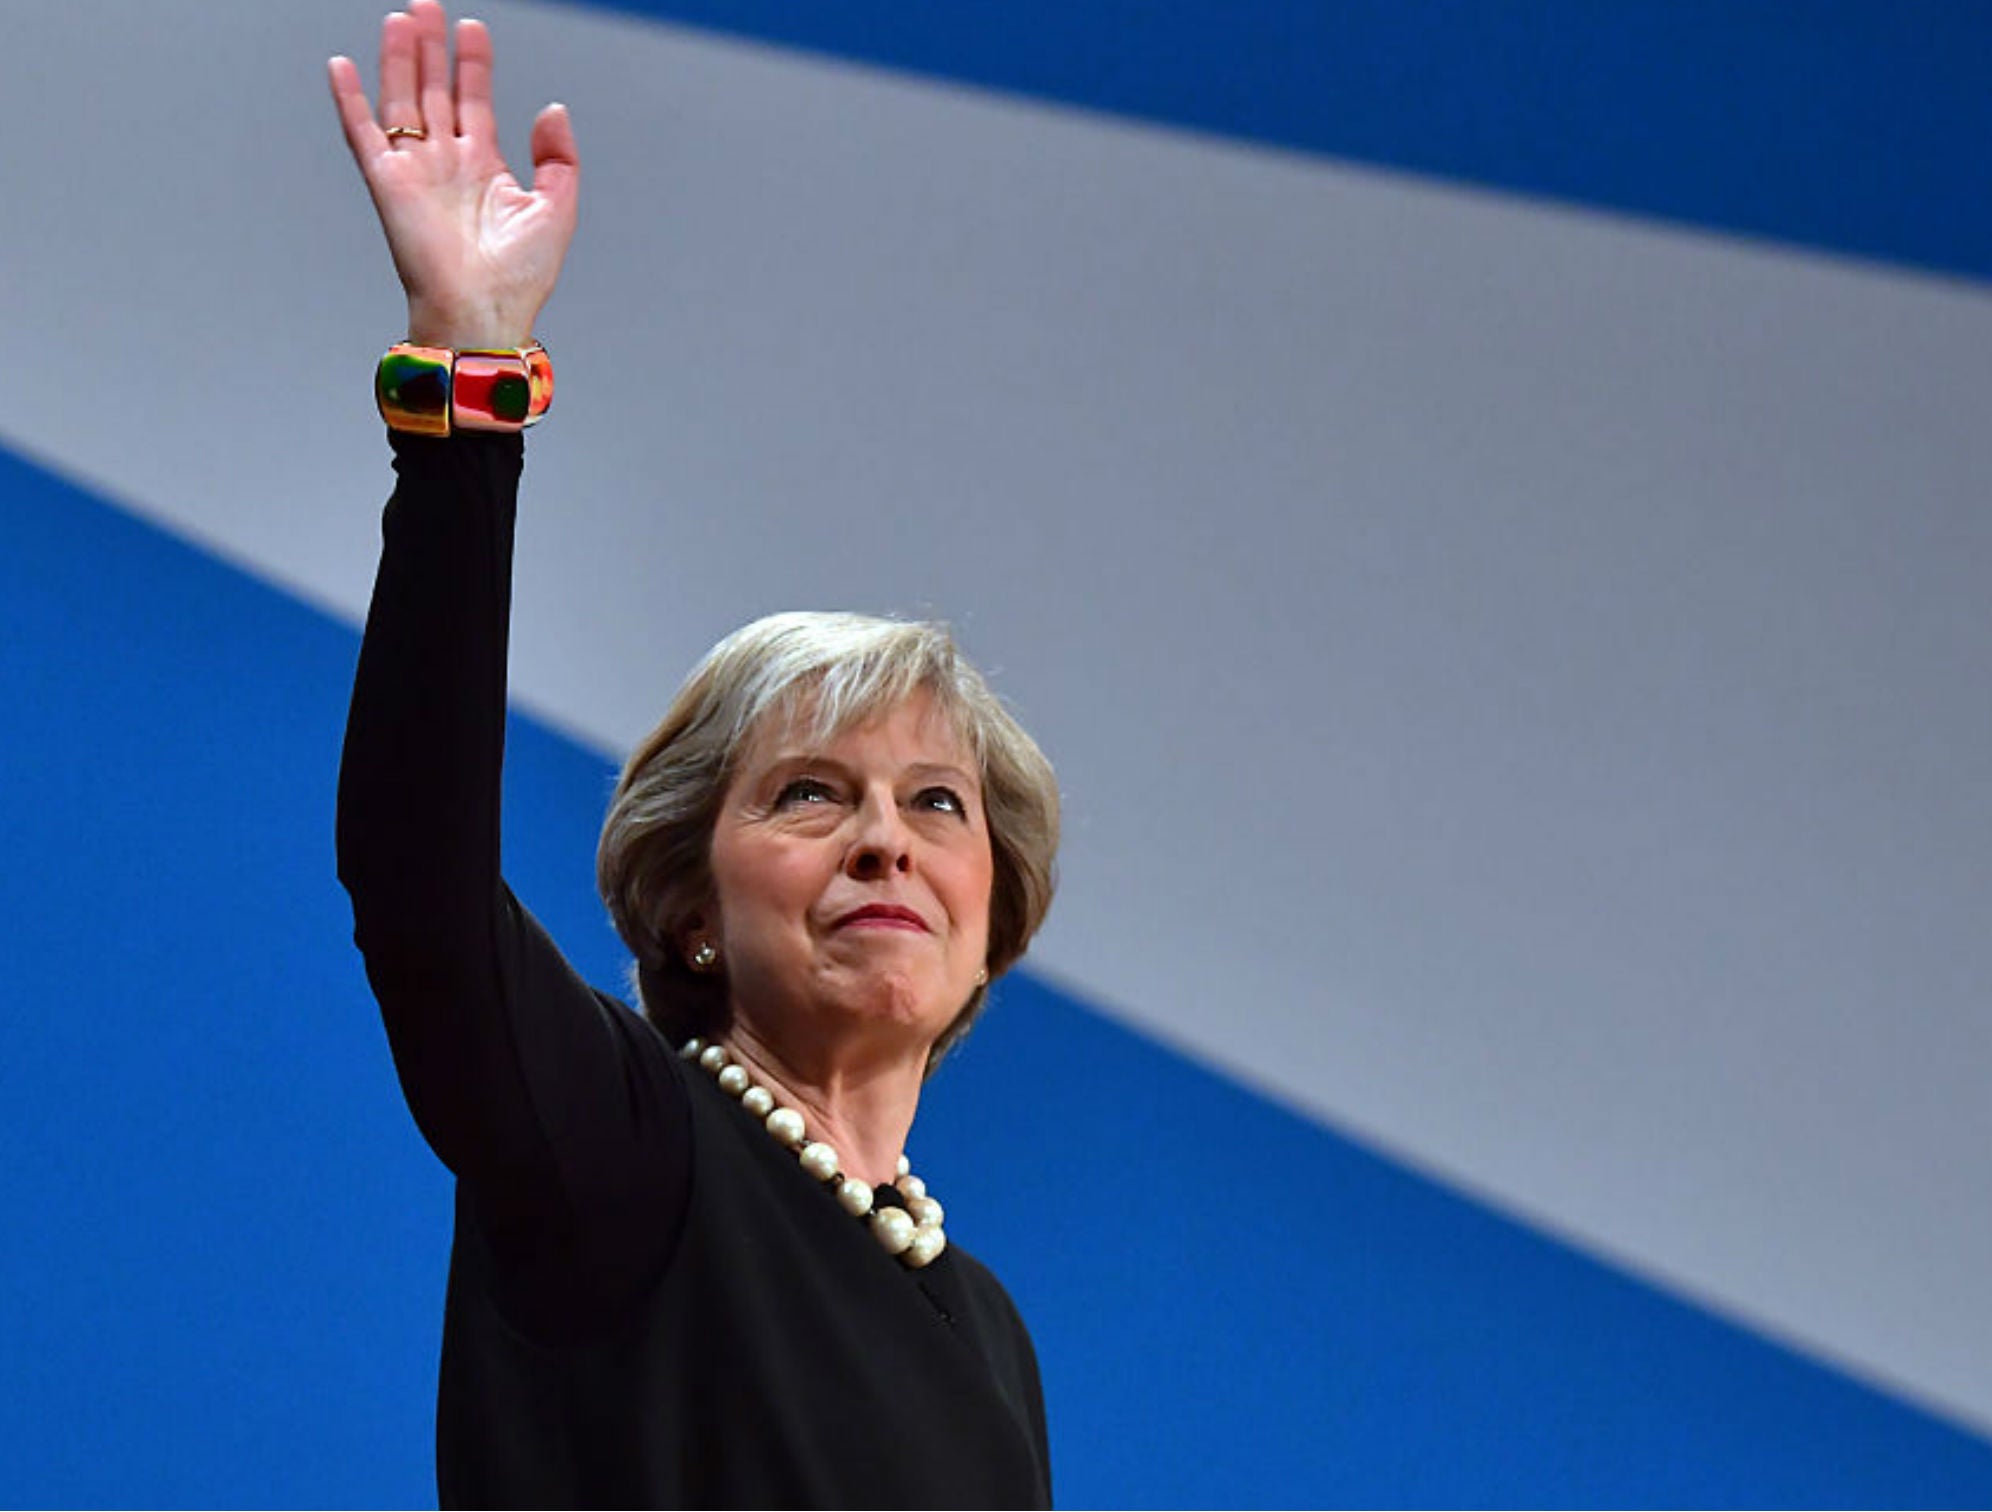 Theresa May delivering her first speech as Prime Minister at the 2016 Conservative Party conference in Birmingham